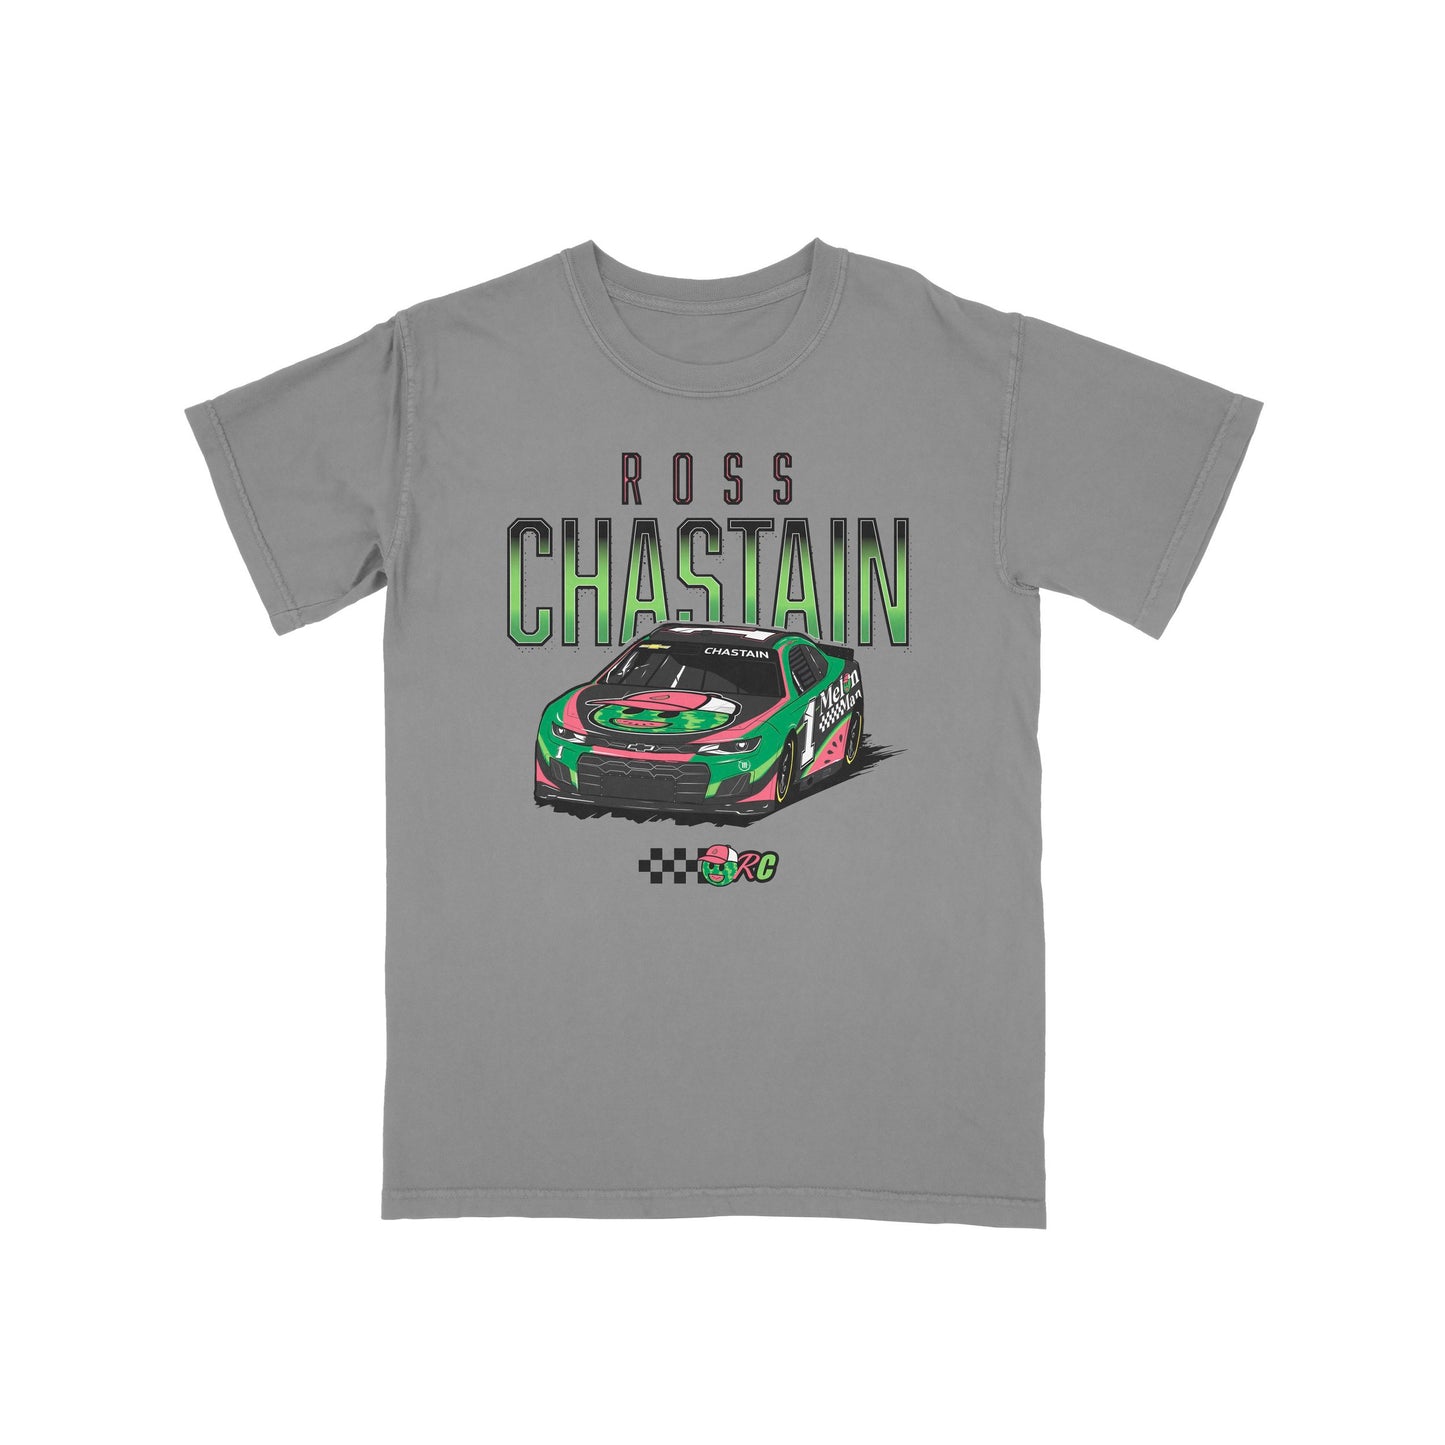 Ross Chastain Driver Tee